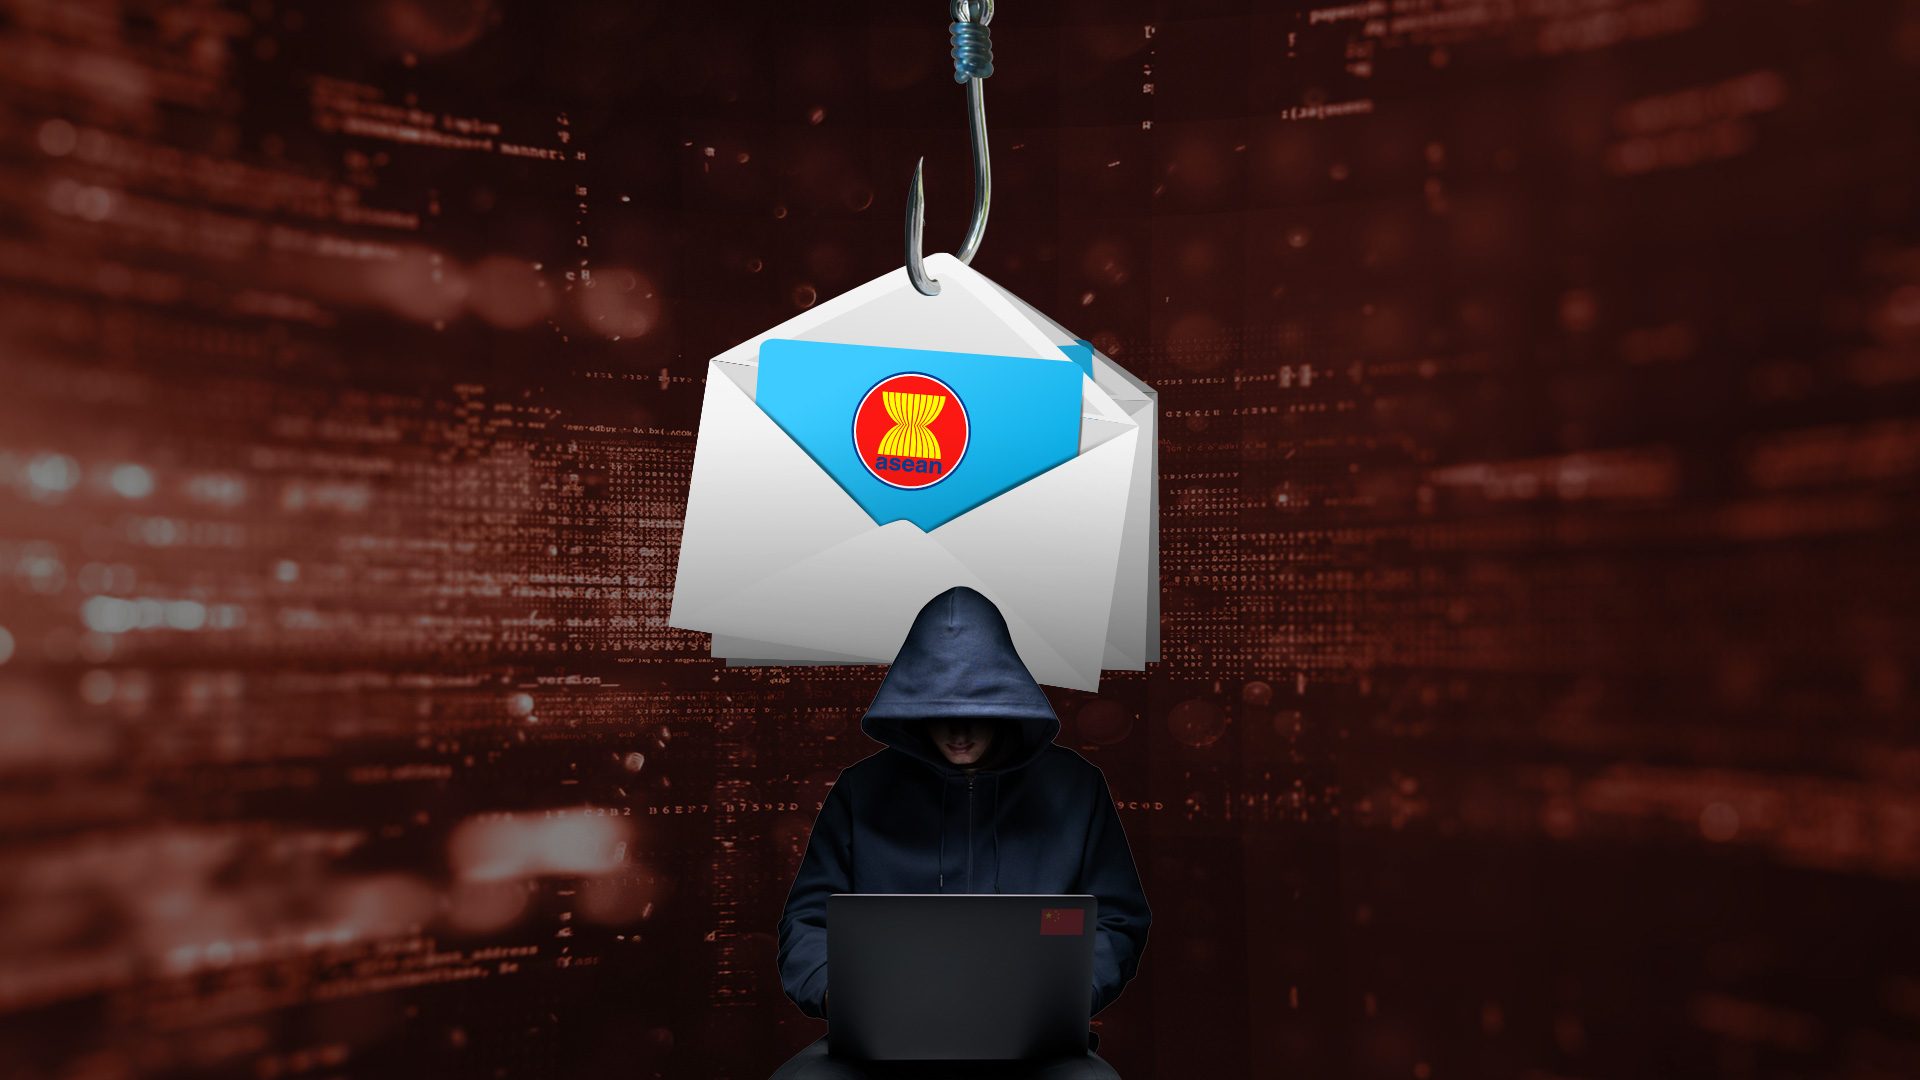 Chinese state-sponsored hackers break into mail servers used by ASEAN members – report